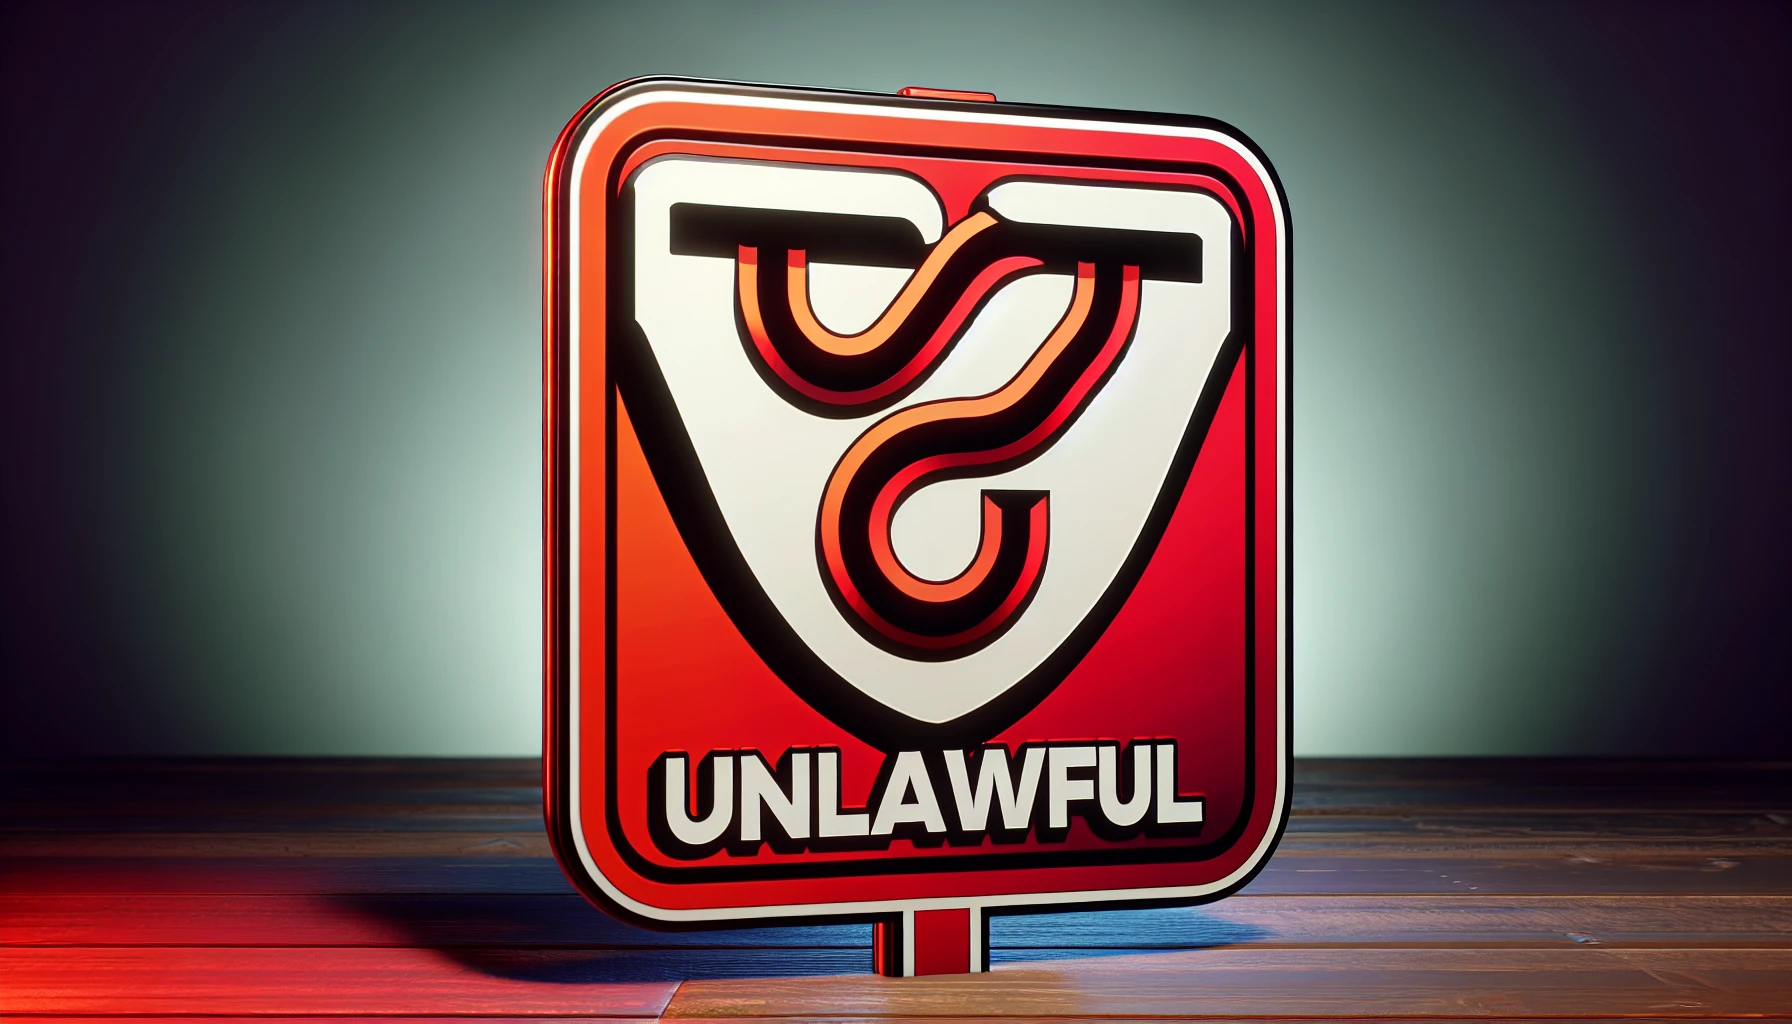 Illustration of a red warning sign with 'illegal' text and Roblox logo